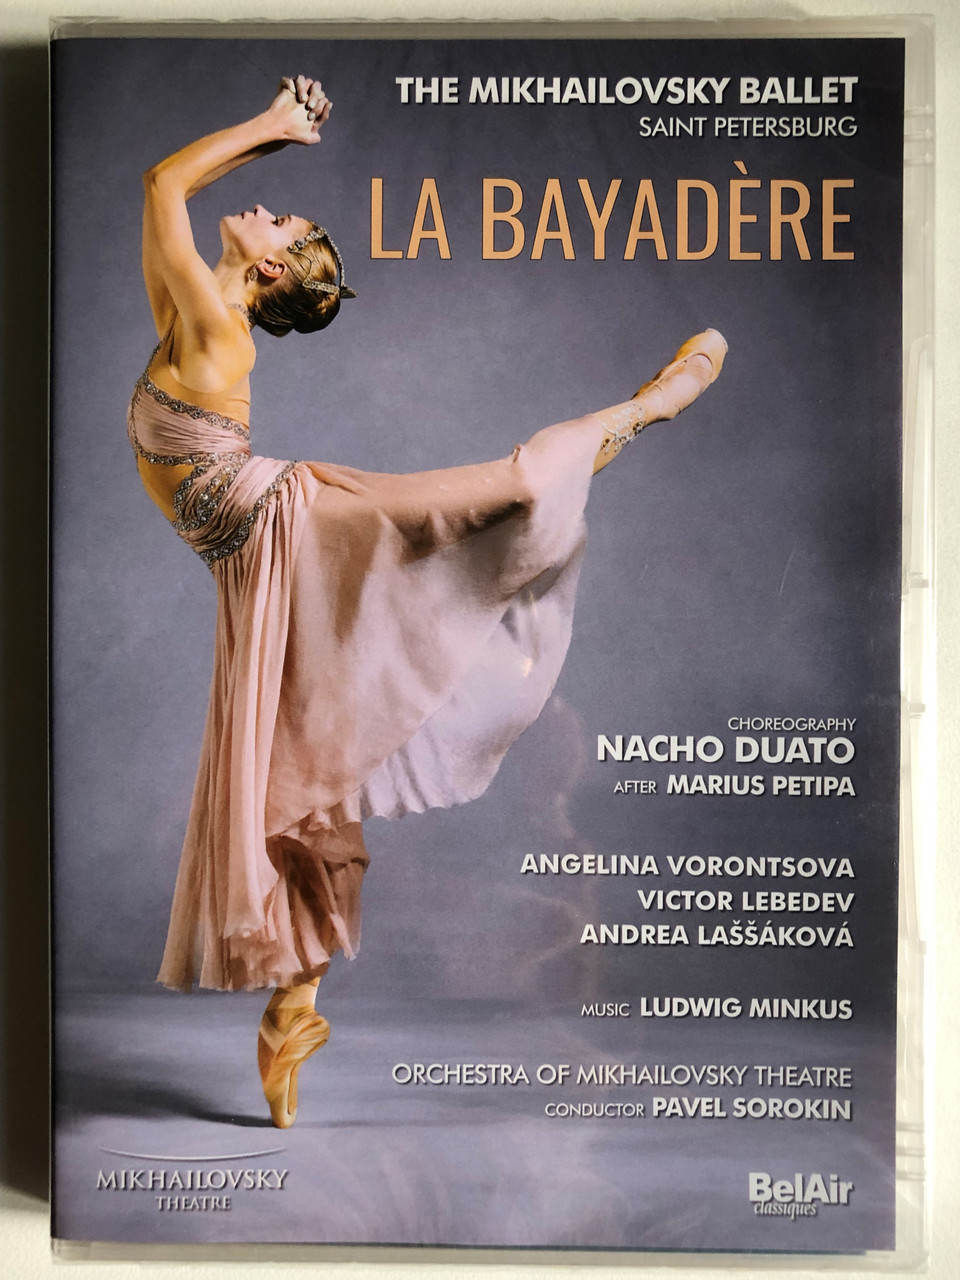 MINKUS_Bayadere_Ballet_in_three_acts_Libretto_THE_MOUSE_PETIPA_and_SERGY_KHUDEKOV_THE_MIKHAILOVSKY_BALLET.ORCHESTRA_OF_MIKHAILOVSKY_THEATRE_Conductor_PAVEL_SOROKIN_DVD_2__76218.1691723678.1280.1280.JPG (960×1280)